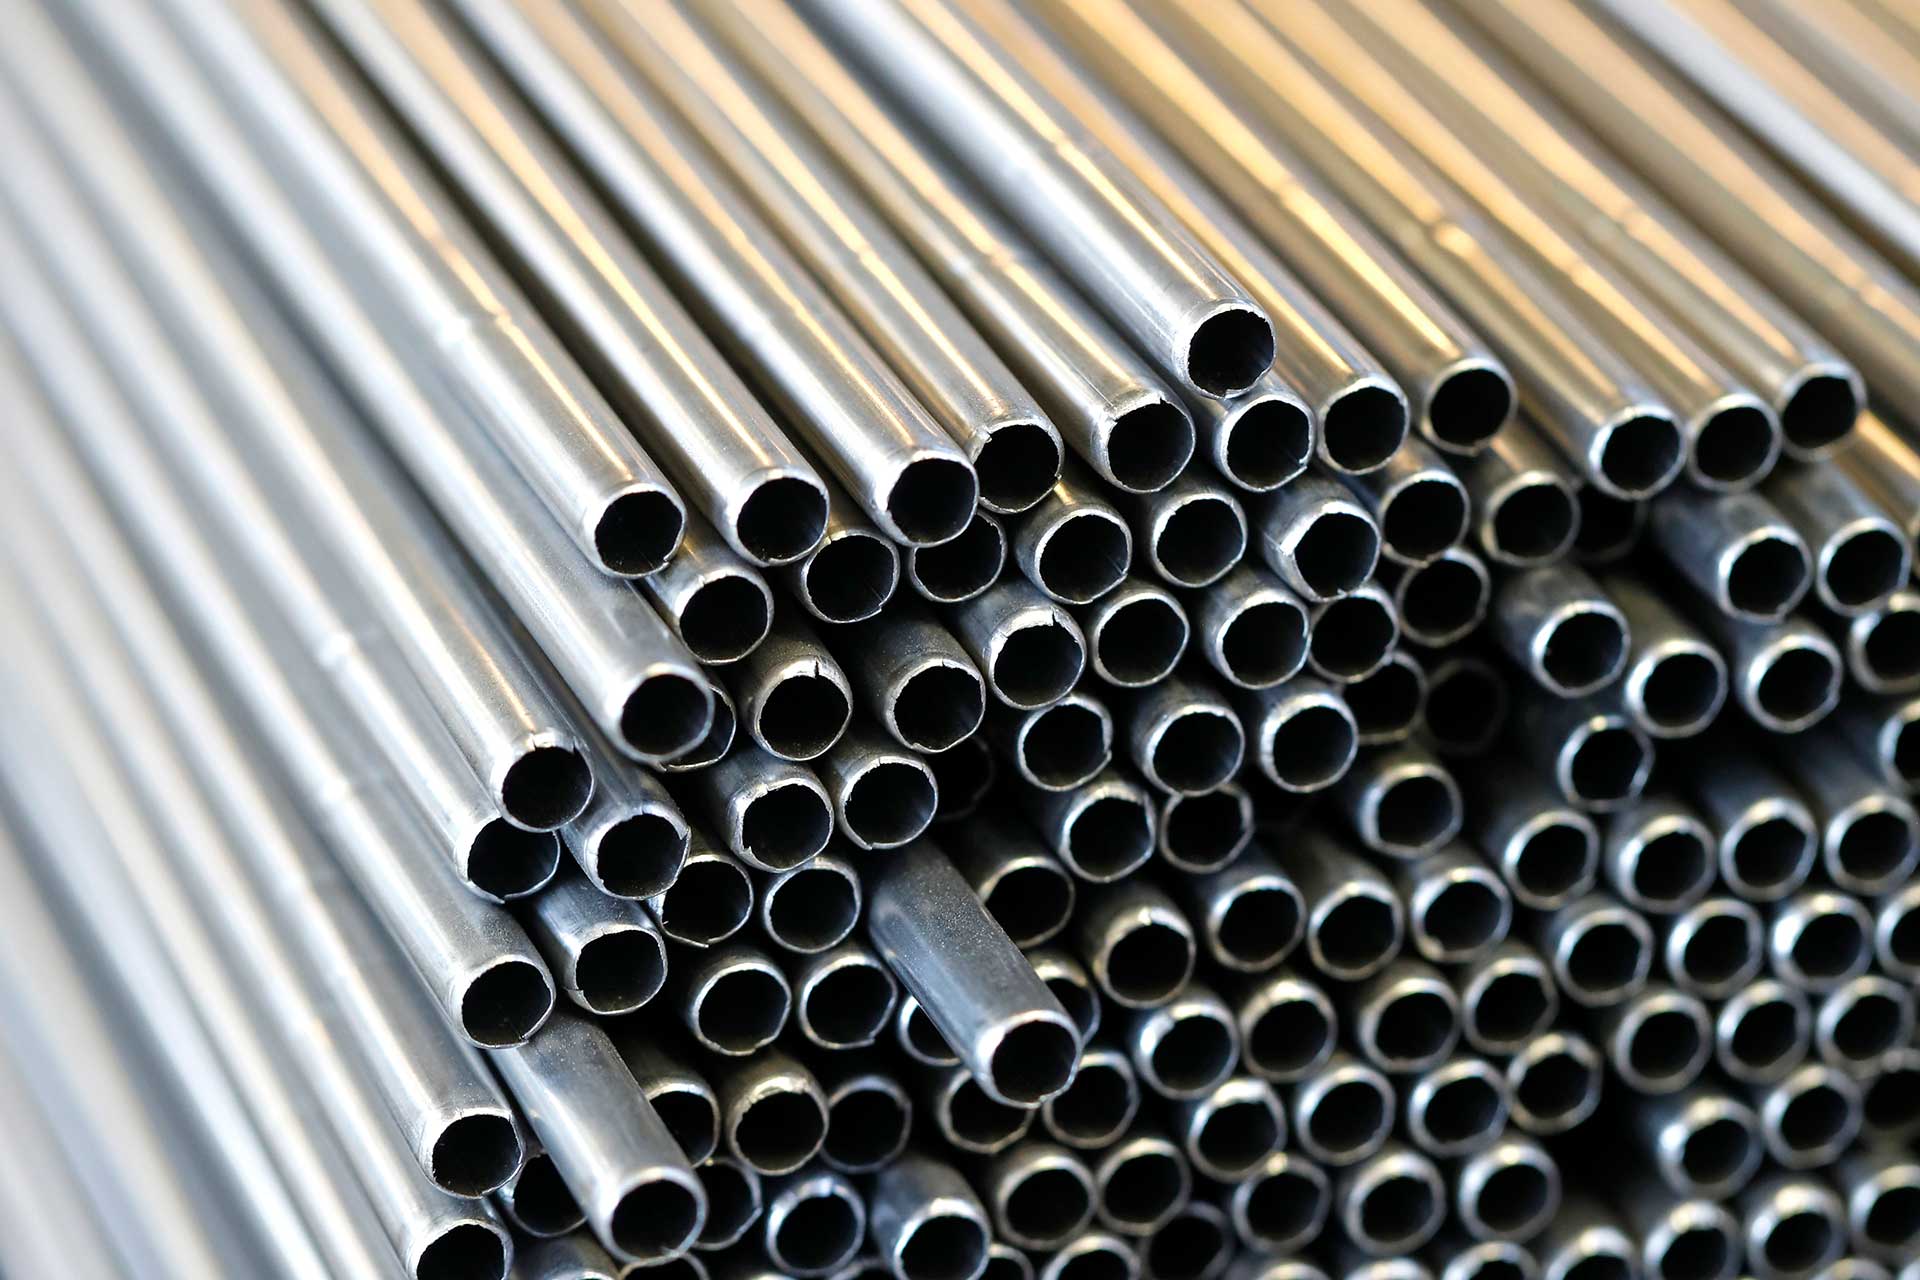 A close up picture of welded tubes